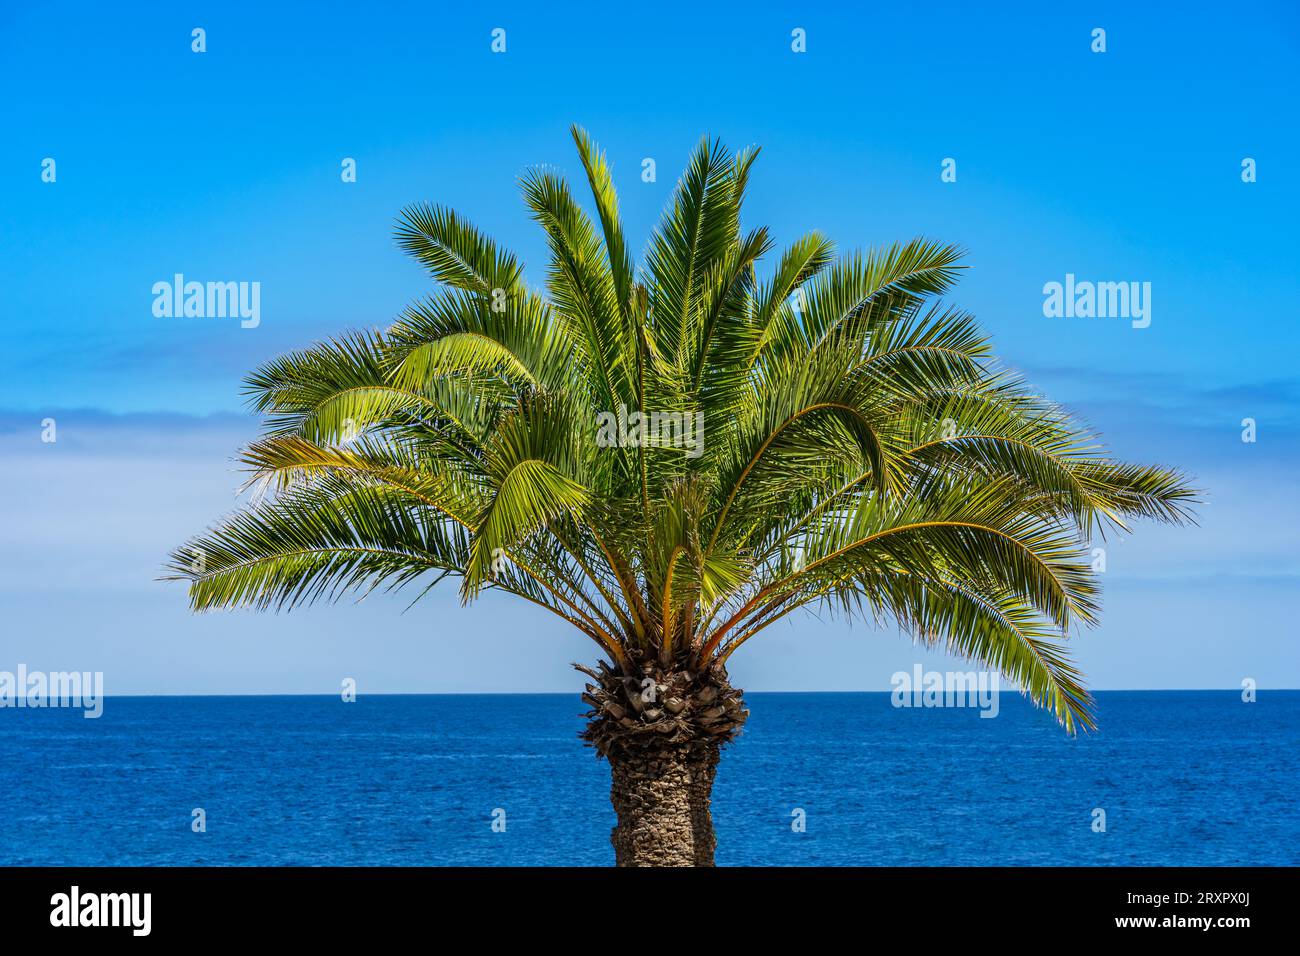 One palm tree with a background of the Pacific Ocean and sky Stock Photo